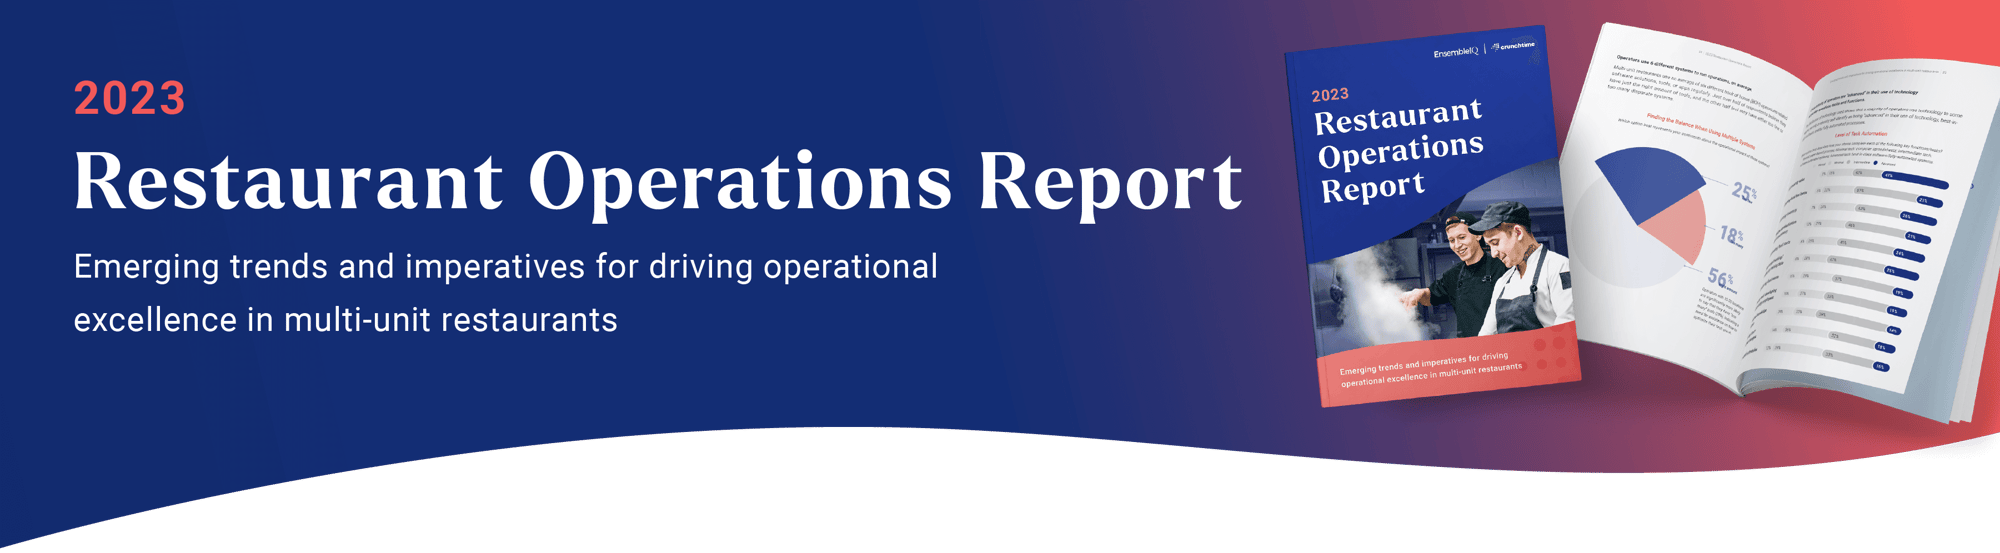 2023 Restaurant Operations Report by Crunchtime and EnsembleIQ